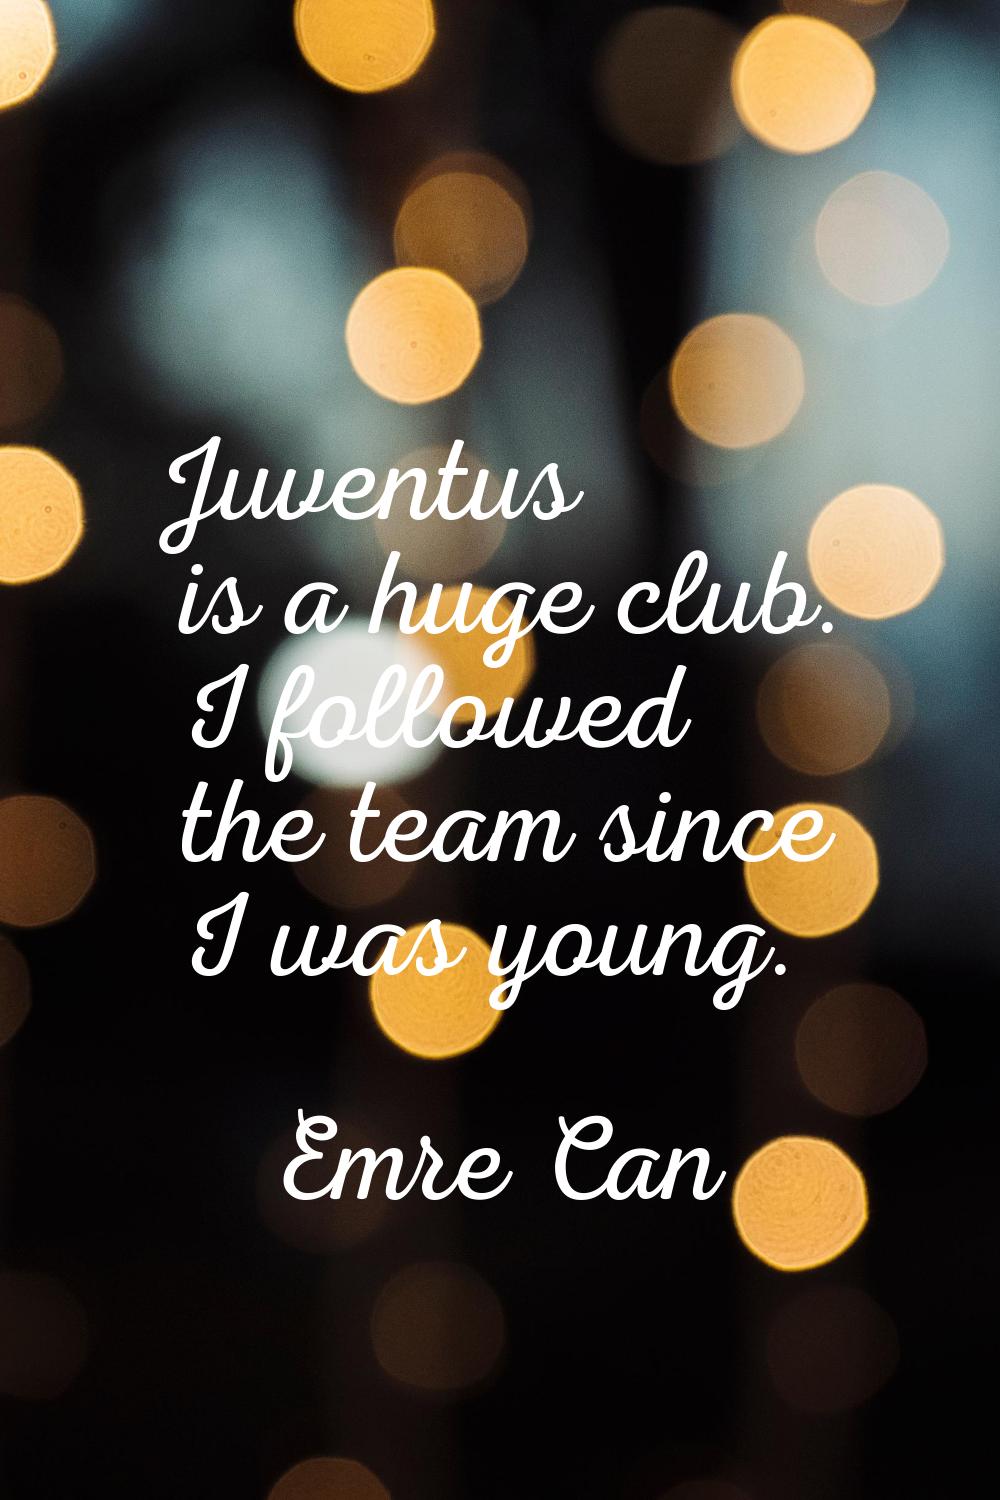 Juventus is a huge club. I followed the team since I was young.